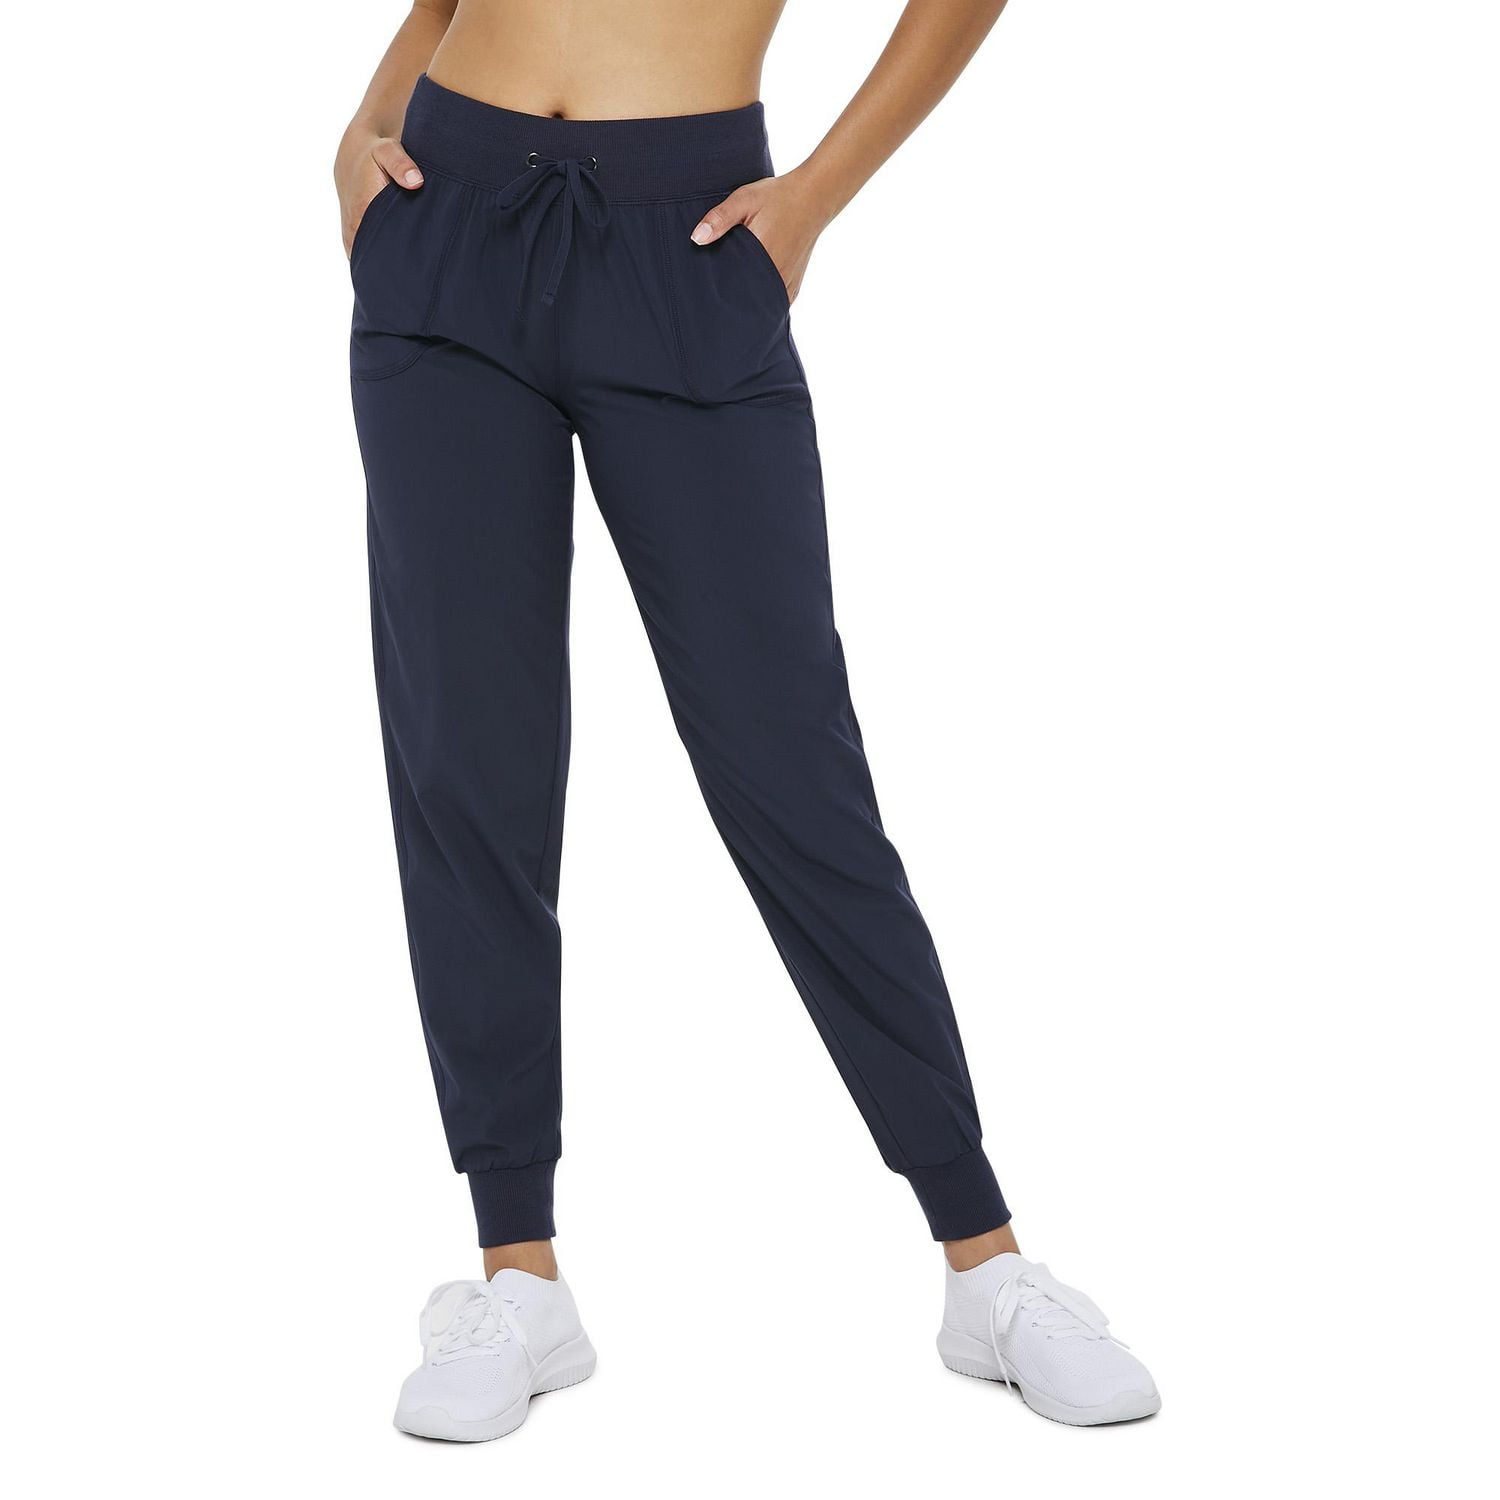 Athletic Works Women's Rib Cuff Woven Pant 